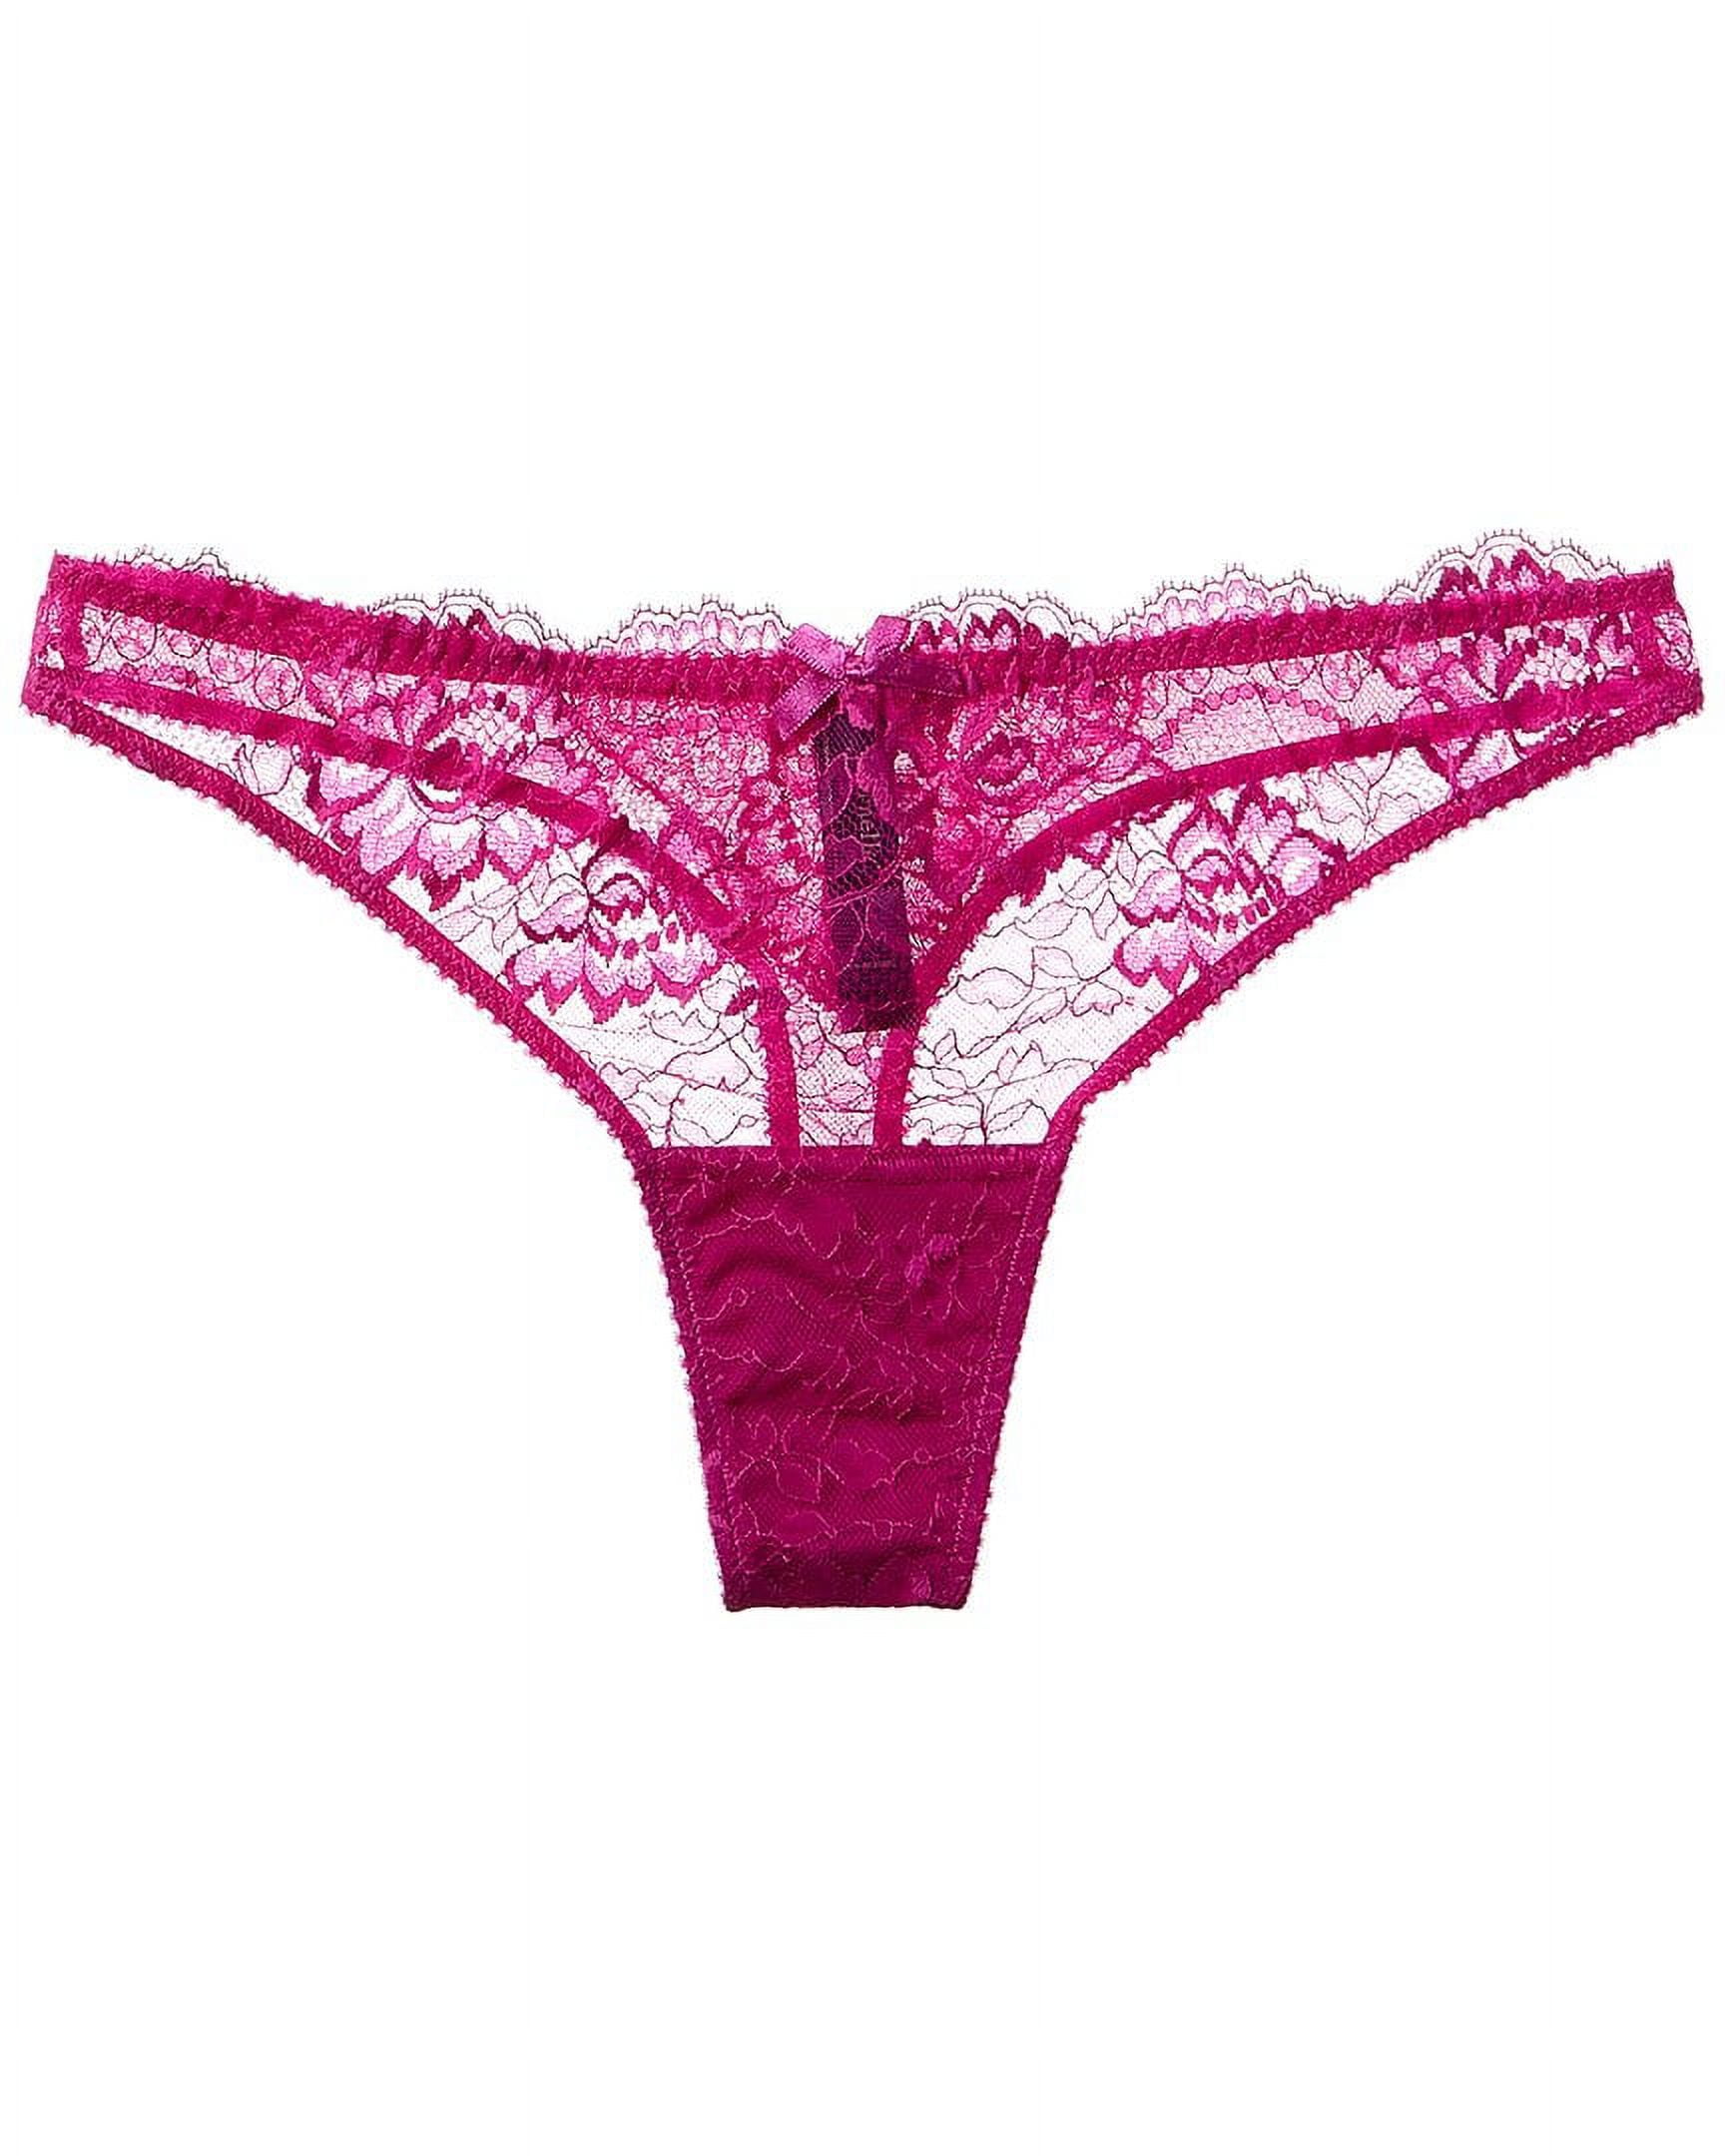 GWAABD Cheekster Panties for Women Pearl Massage Female Lace